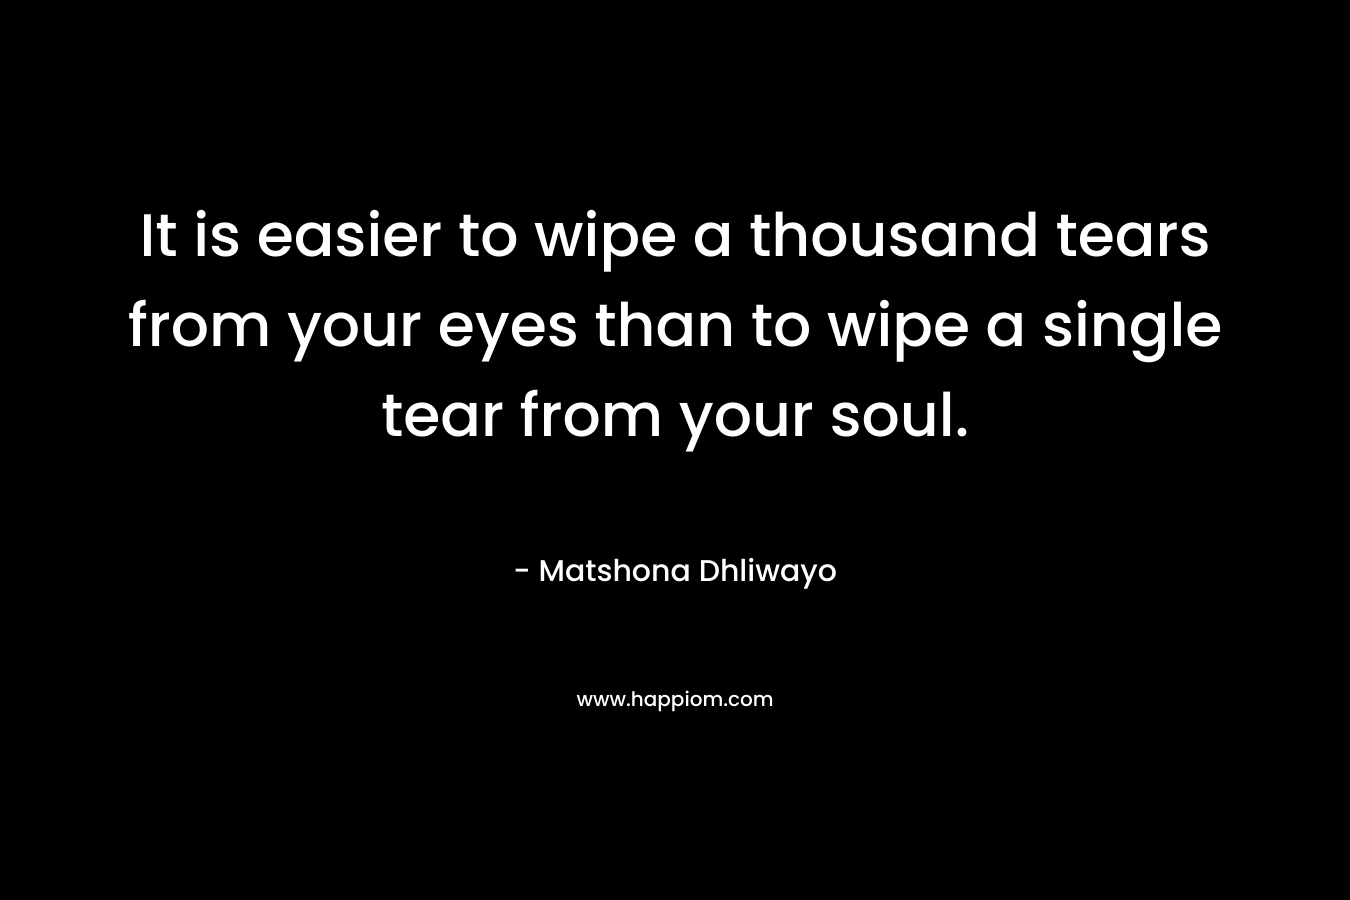 It is easier to wipe a thousand tears from your eyes than to wipe a single tear from your soul.